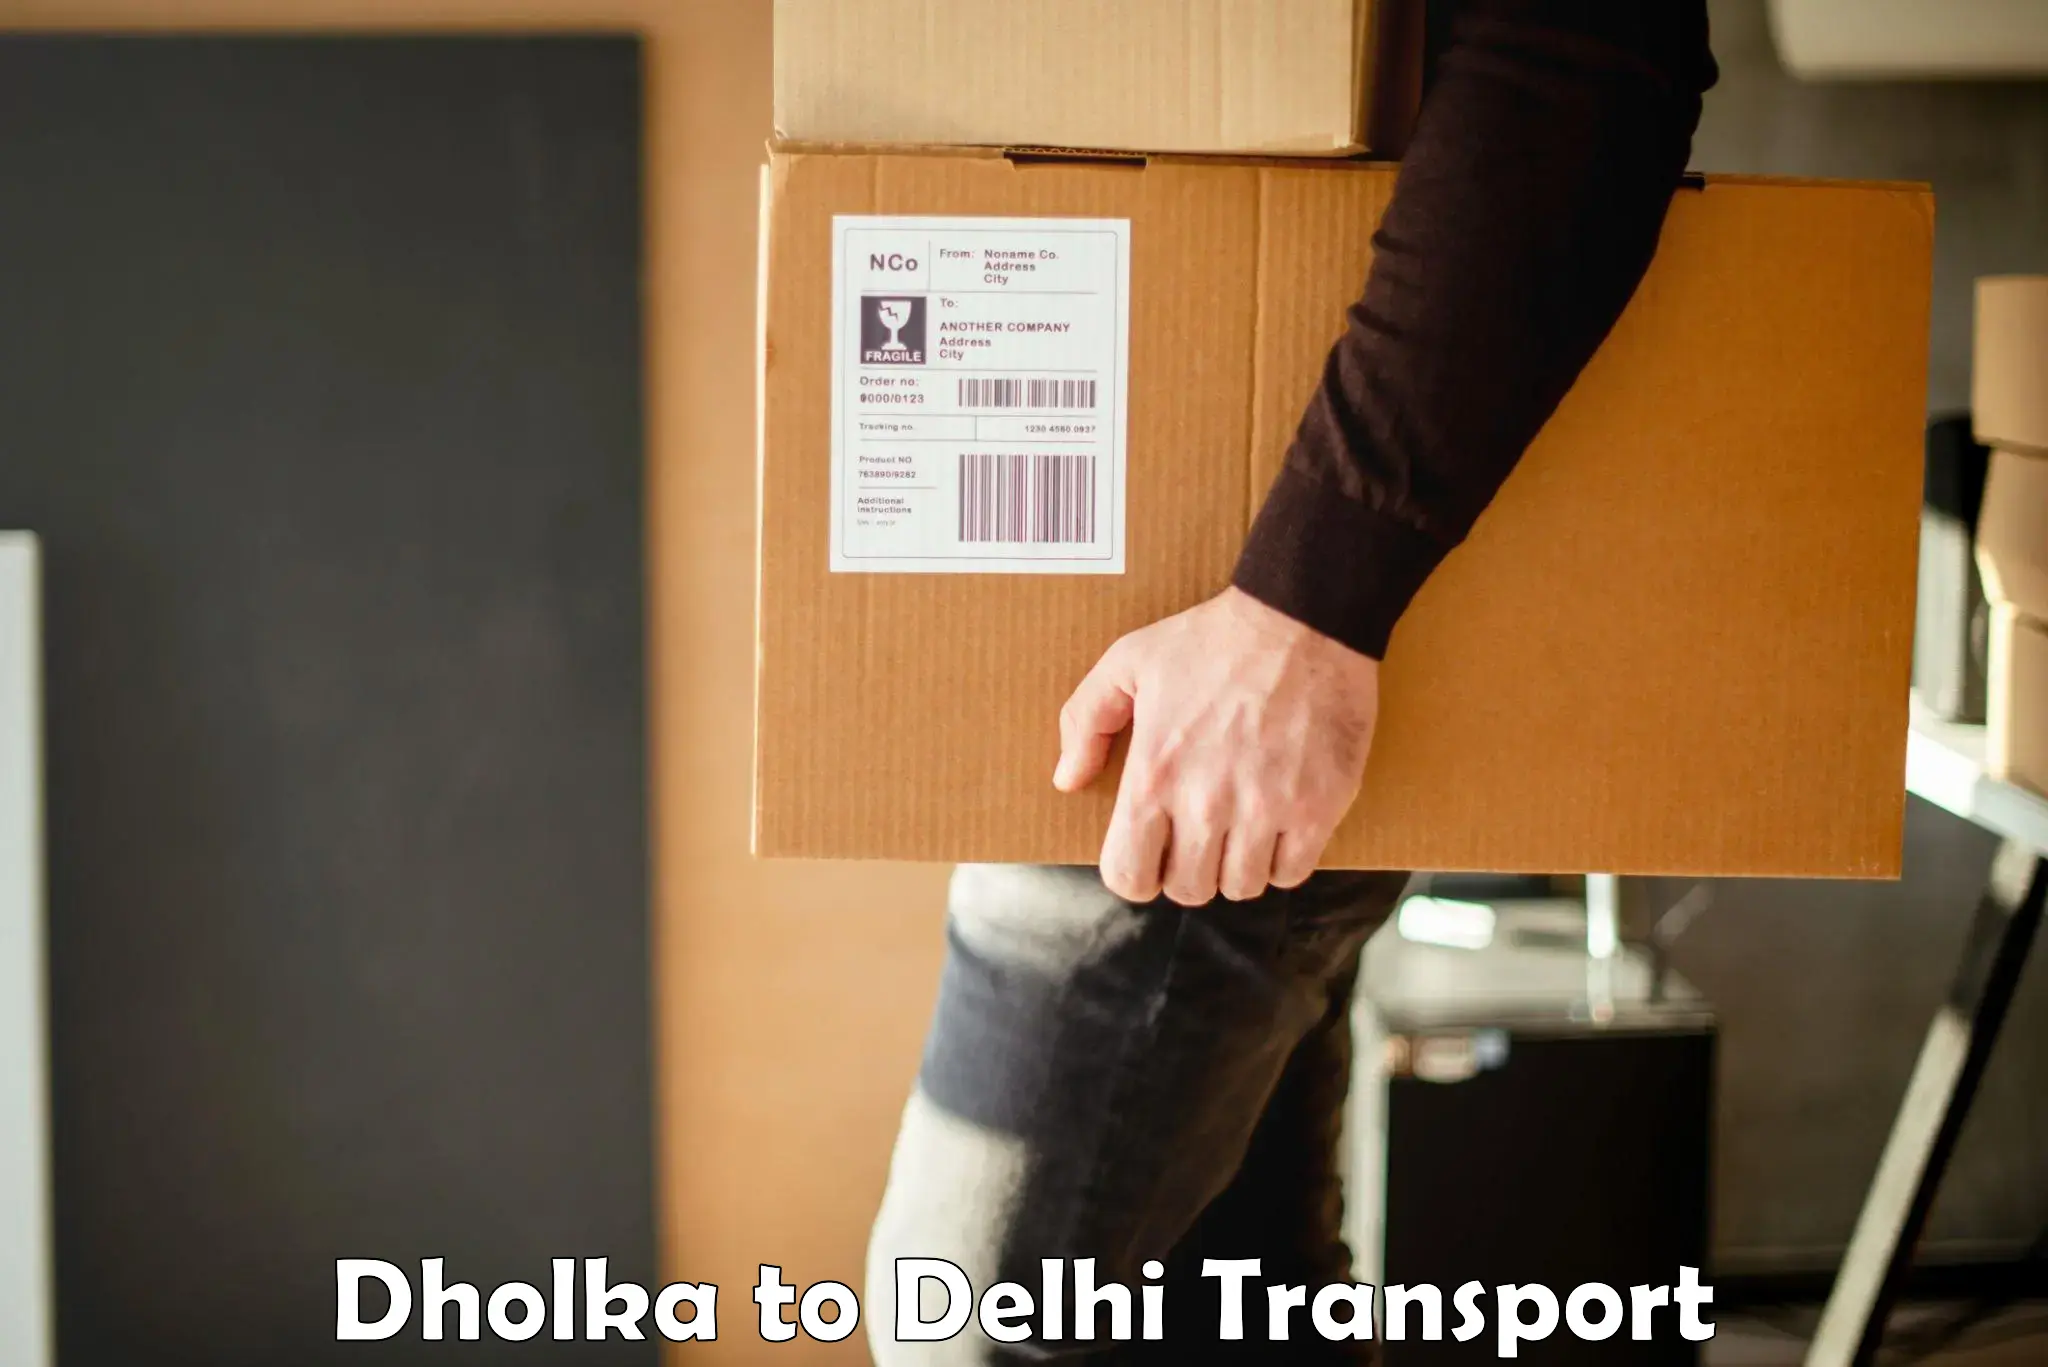 Nearby transport service Dholka to IIT Delhi